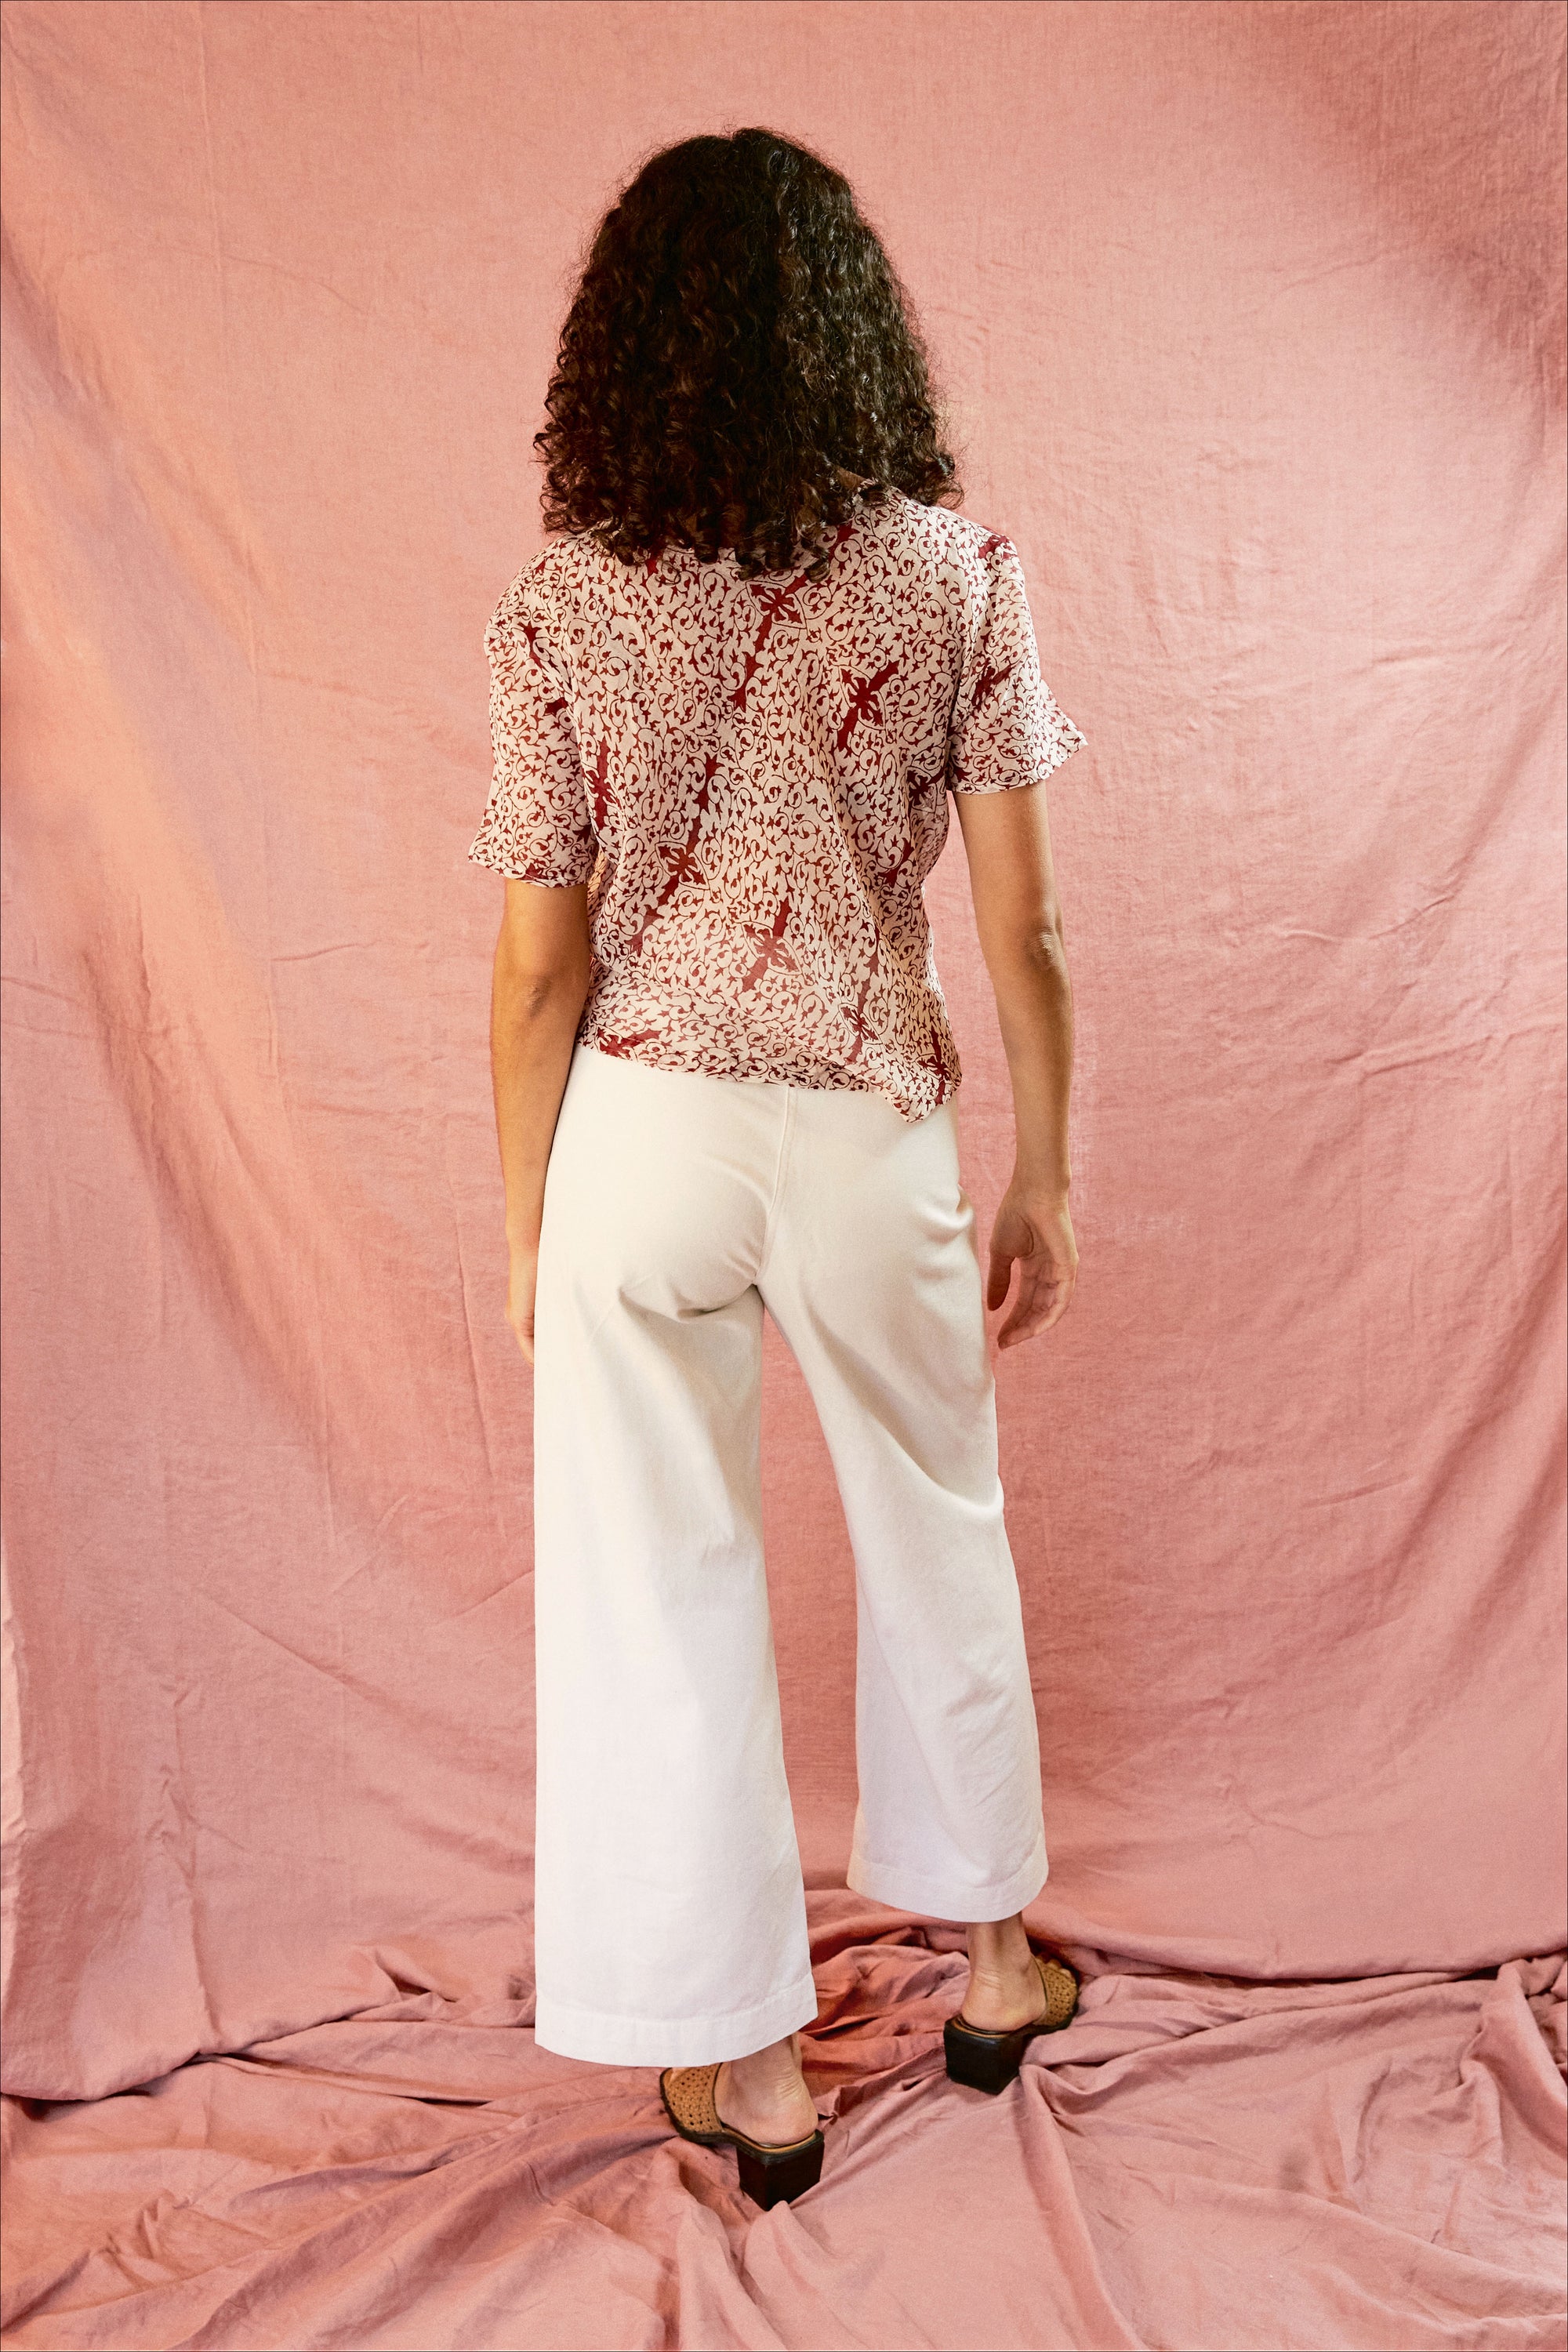 Model wearing the Alicia Top with white pants, against a pink backdrop. Backside of model.